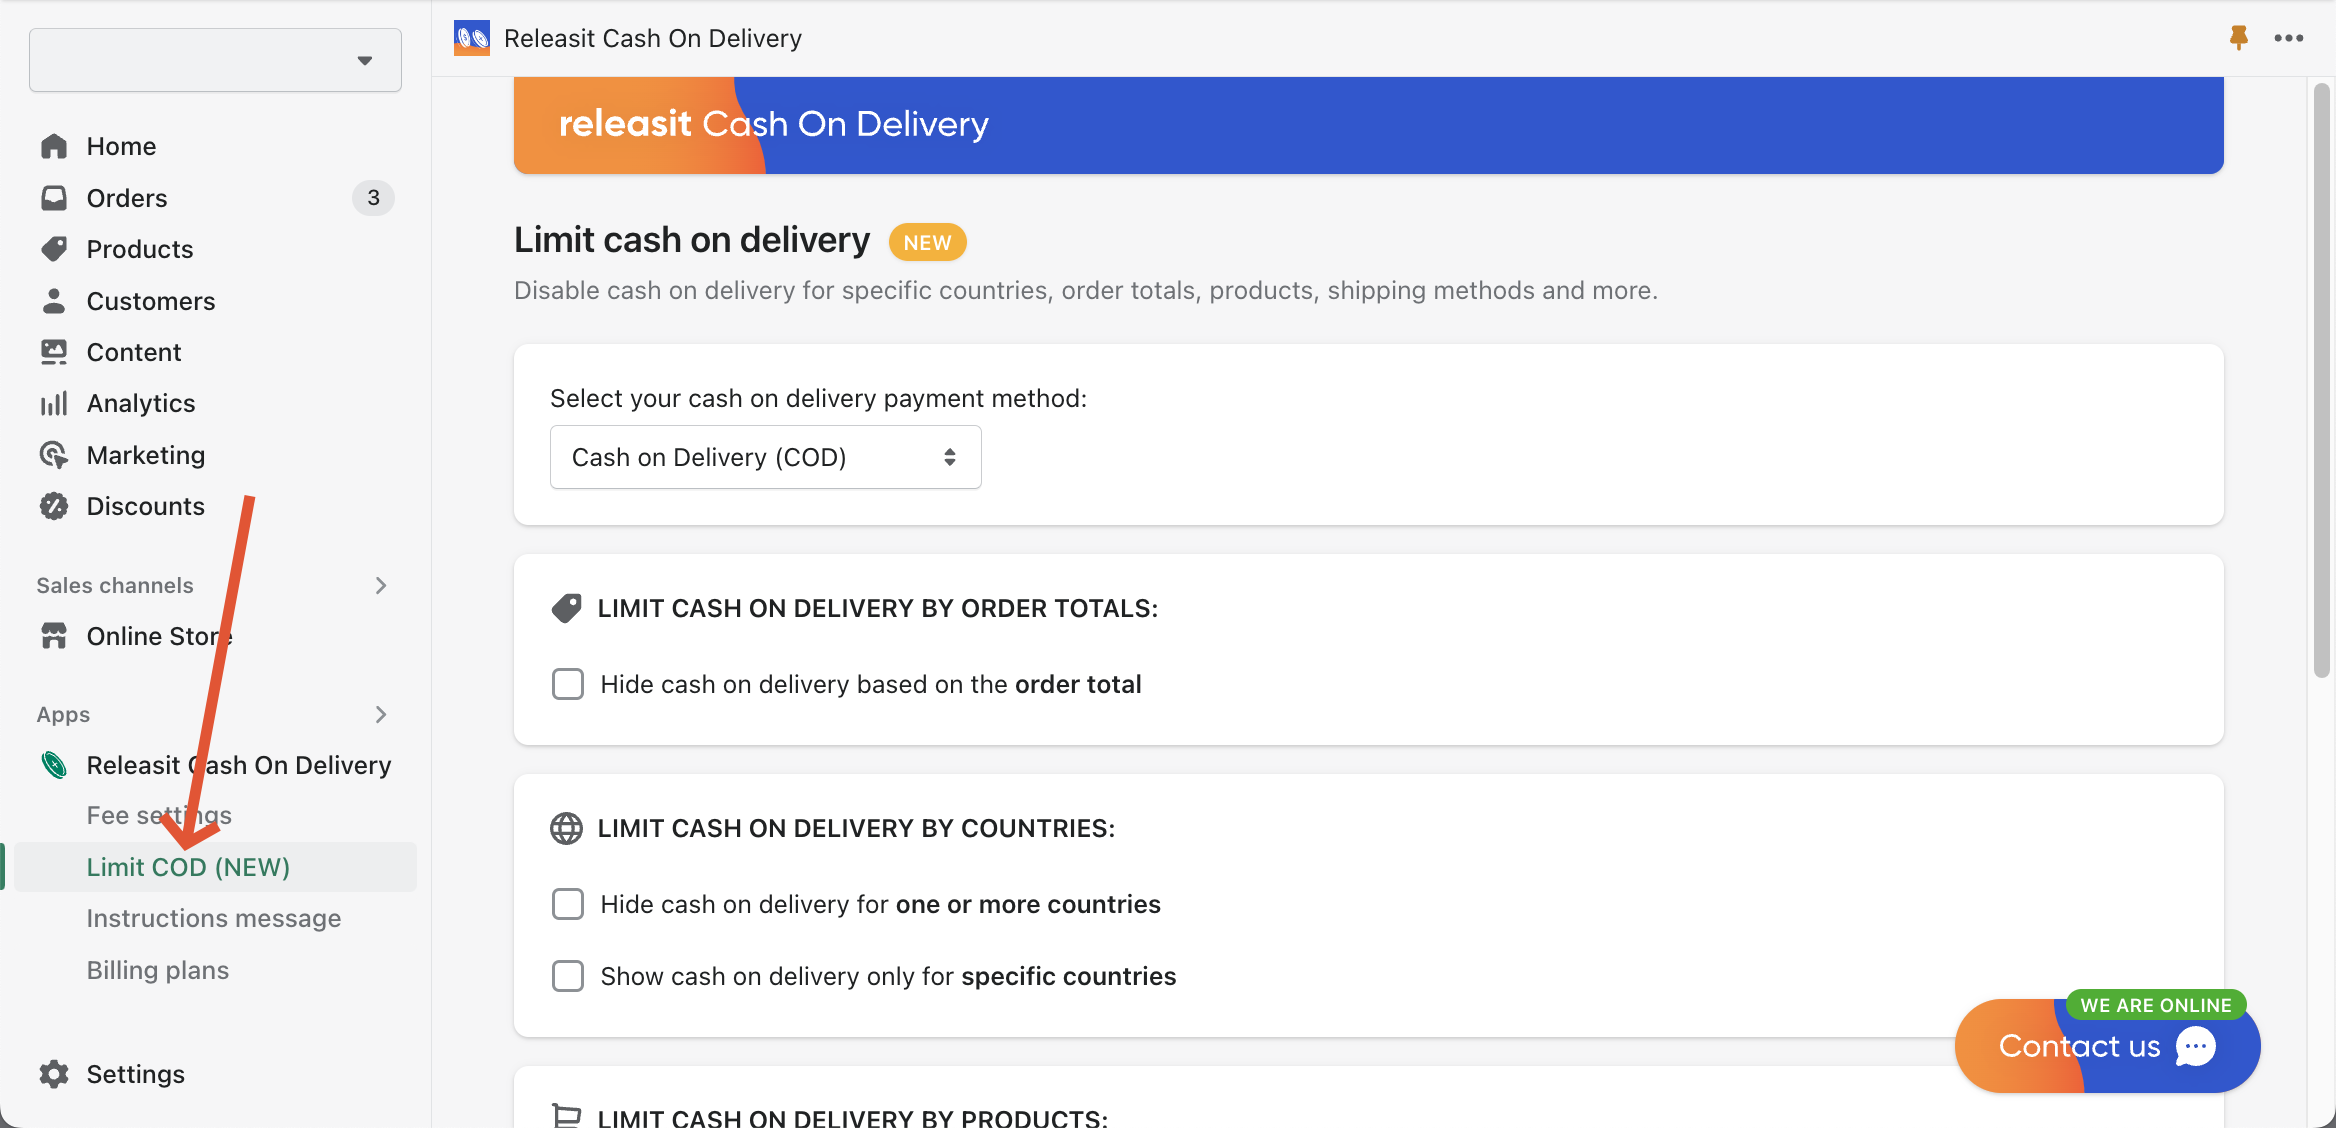 Releasit Cash On Delivery Limit COD page